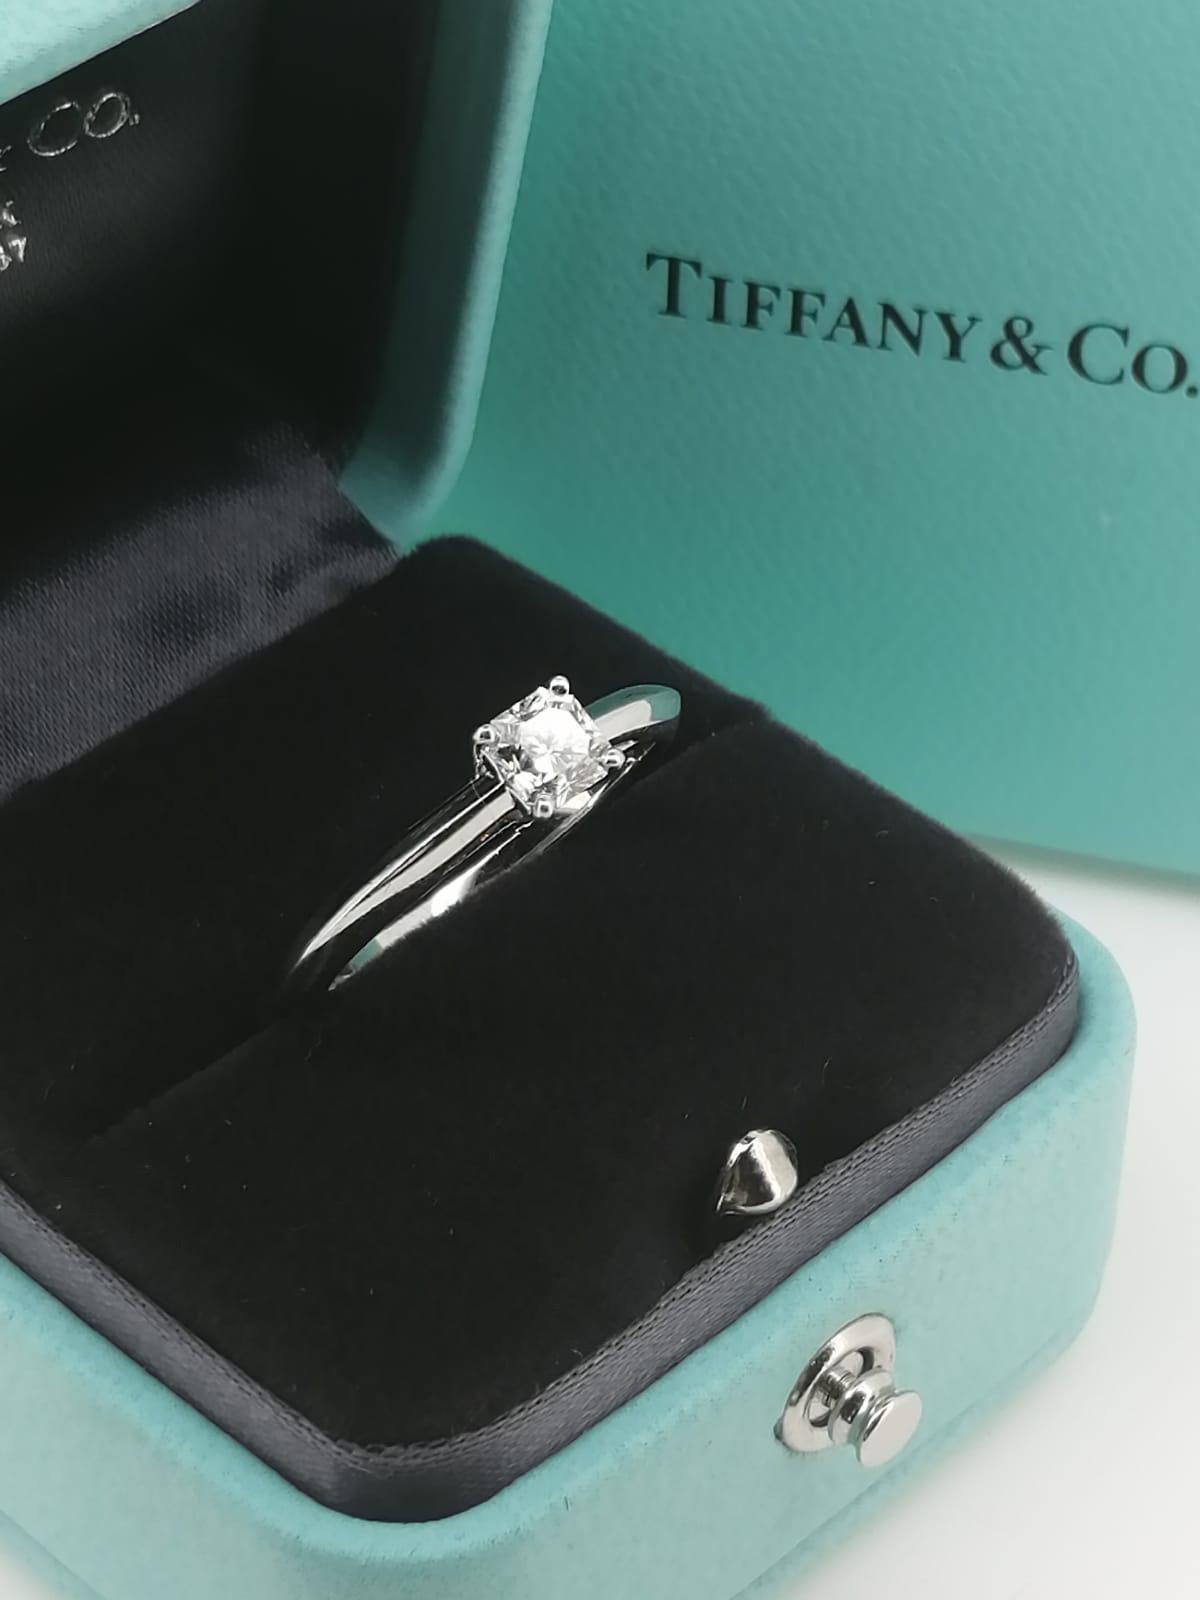 tiffany ring box for sale